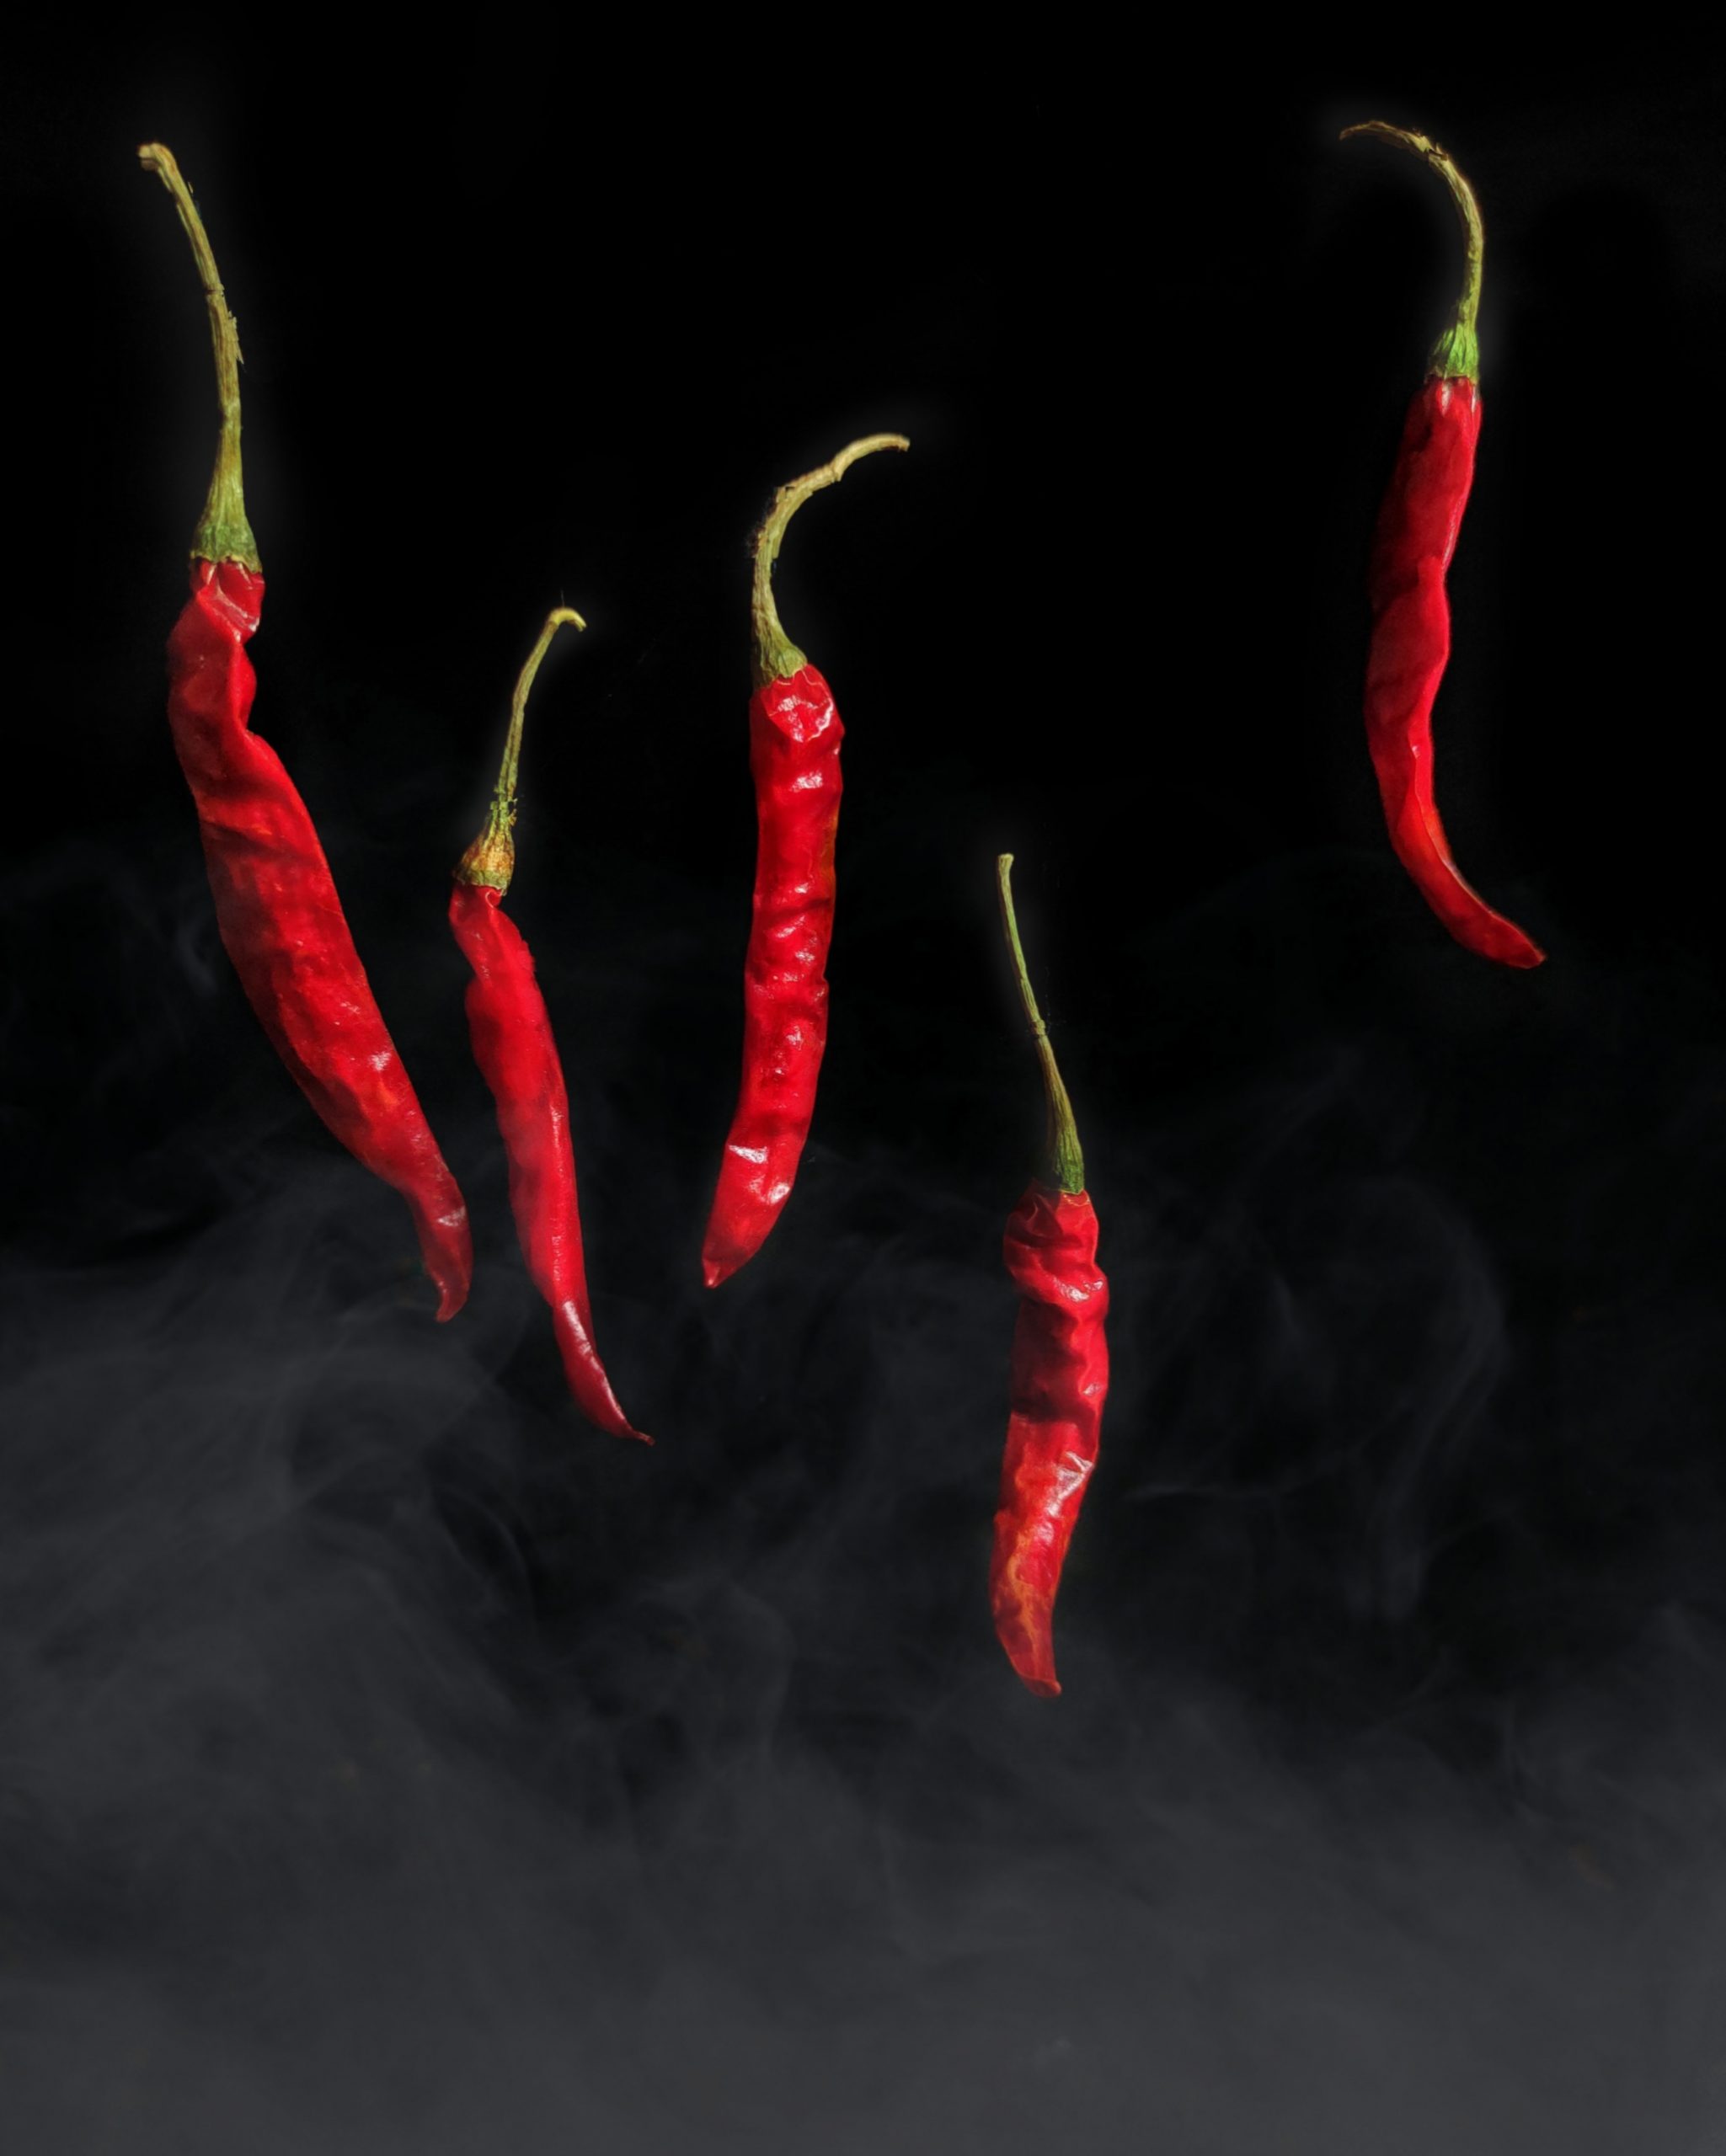 Red chilies with smoke